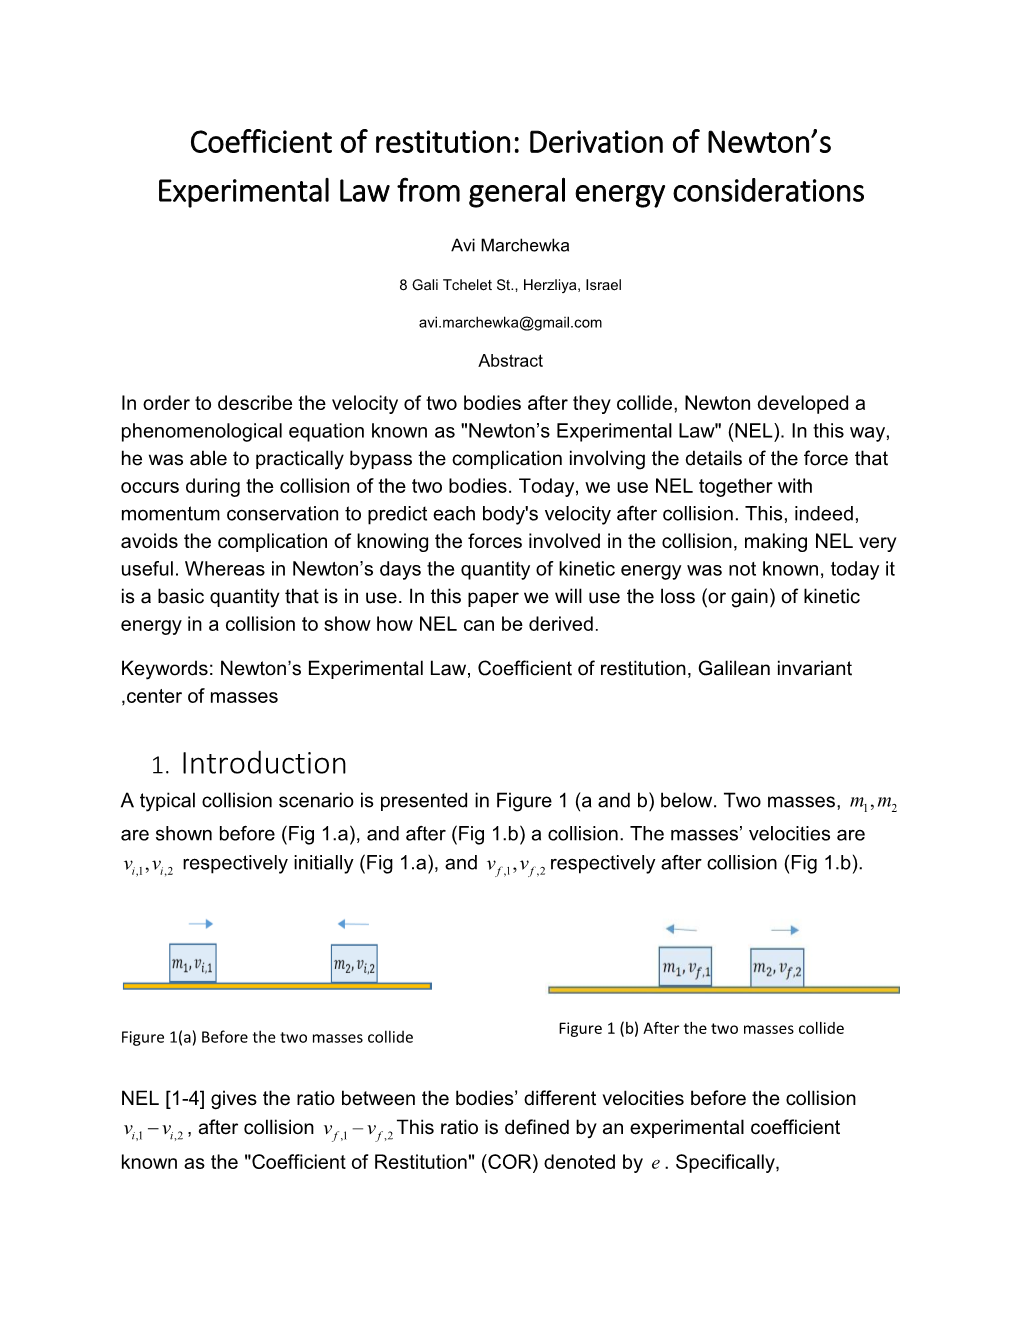 Coefficient of Restitution: Derivation of Newton’S Experimental Law from General Energy Considerations